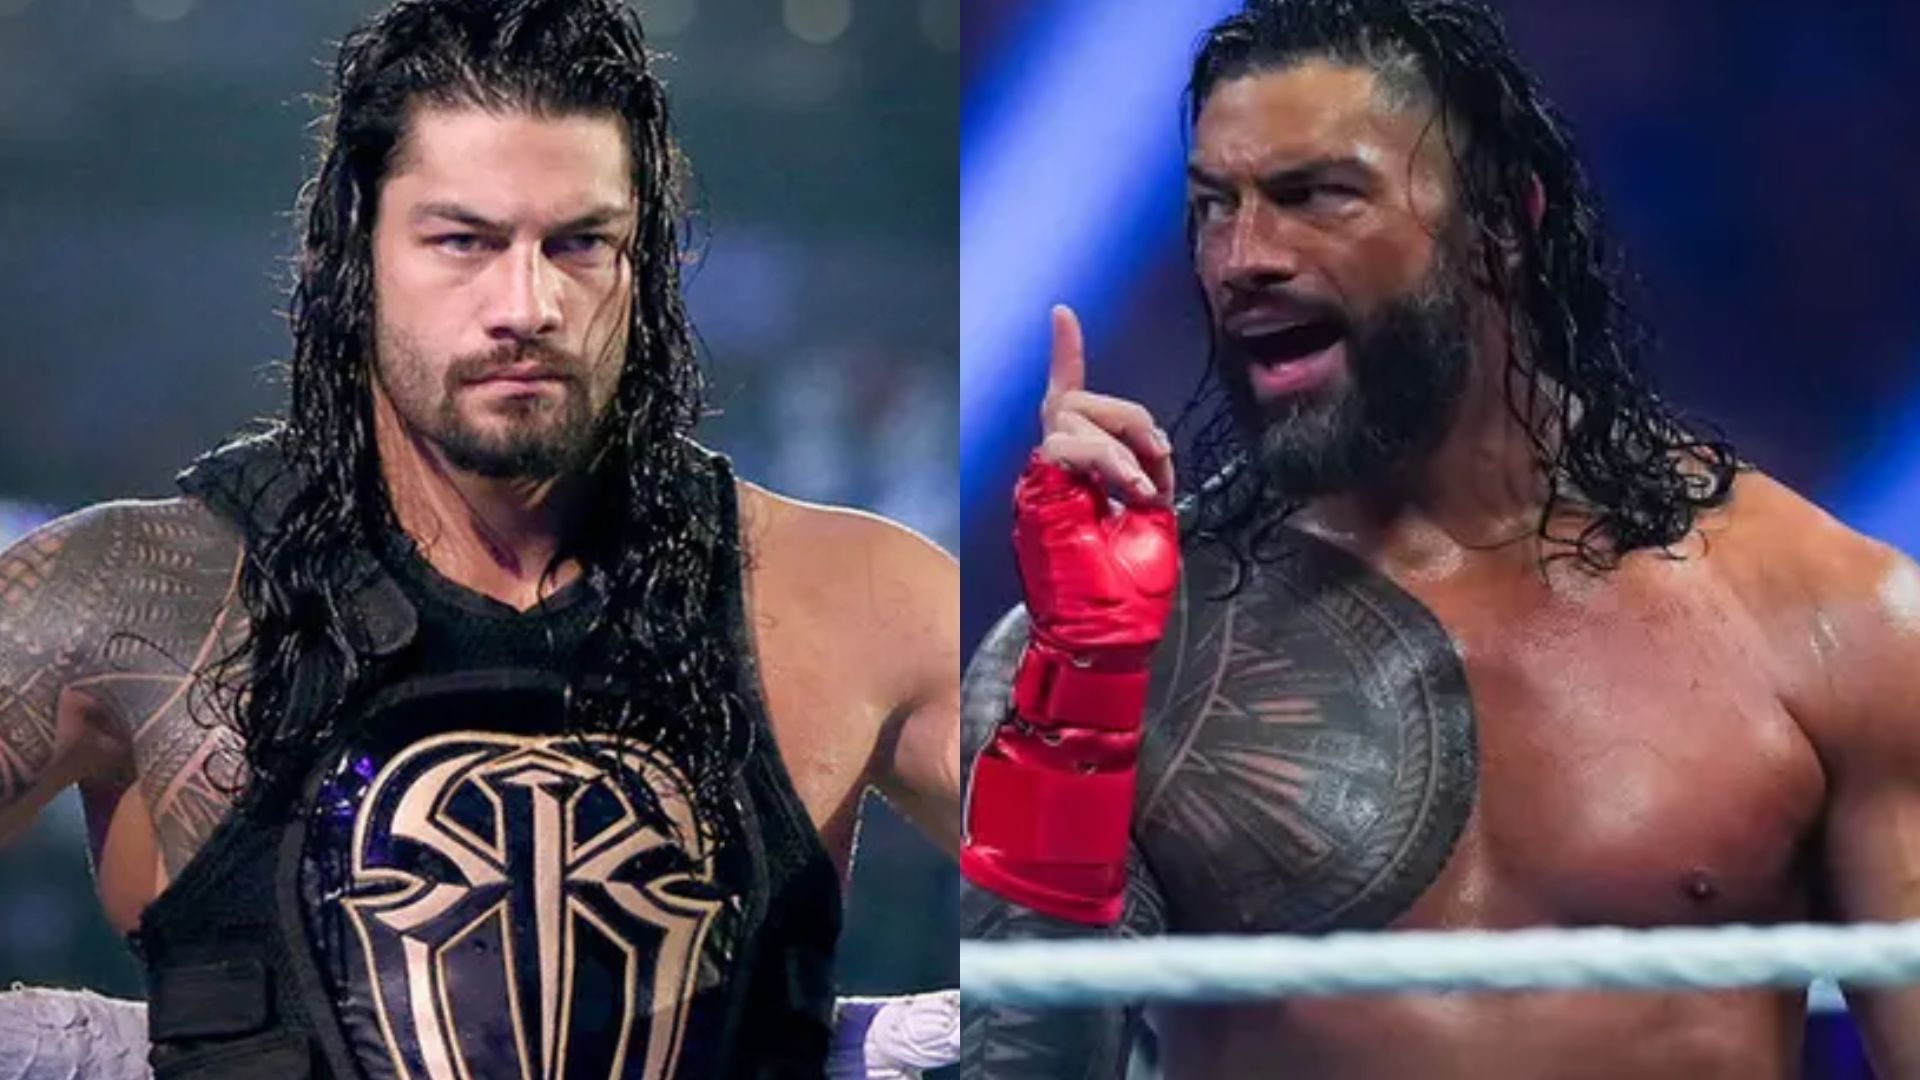 Roman Reigns transformed from the &quot;Big Dog&quot; to the &quot;Tribal Chief&quot; and never looked back!